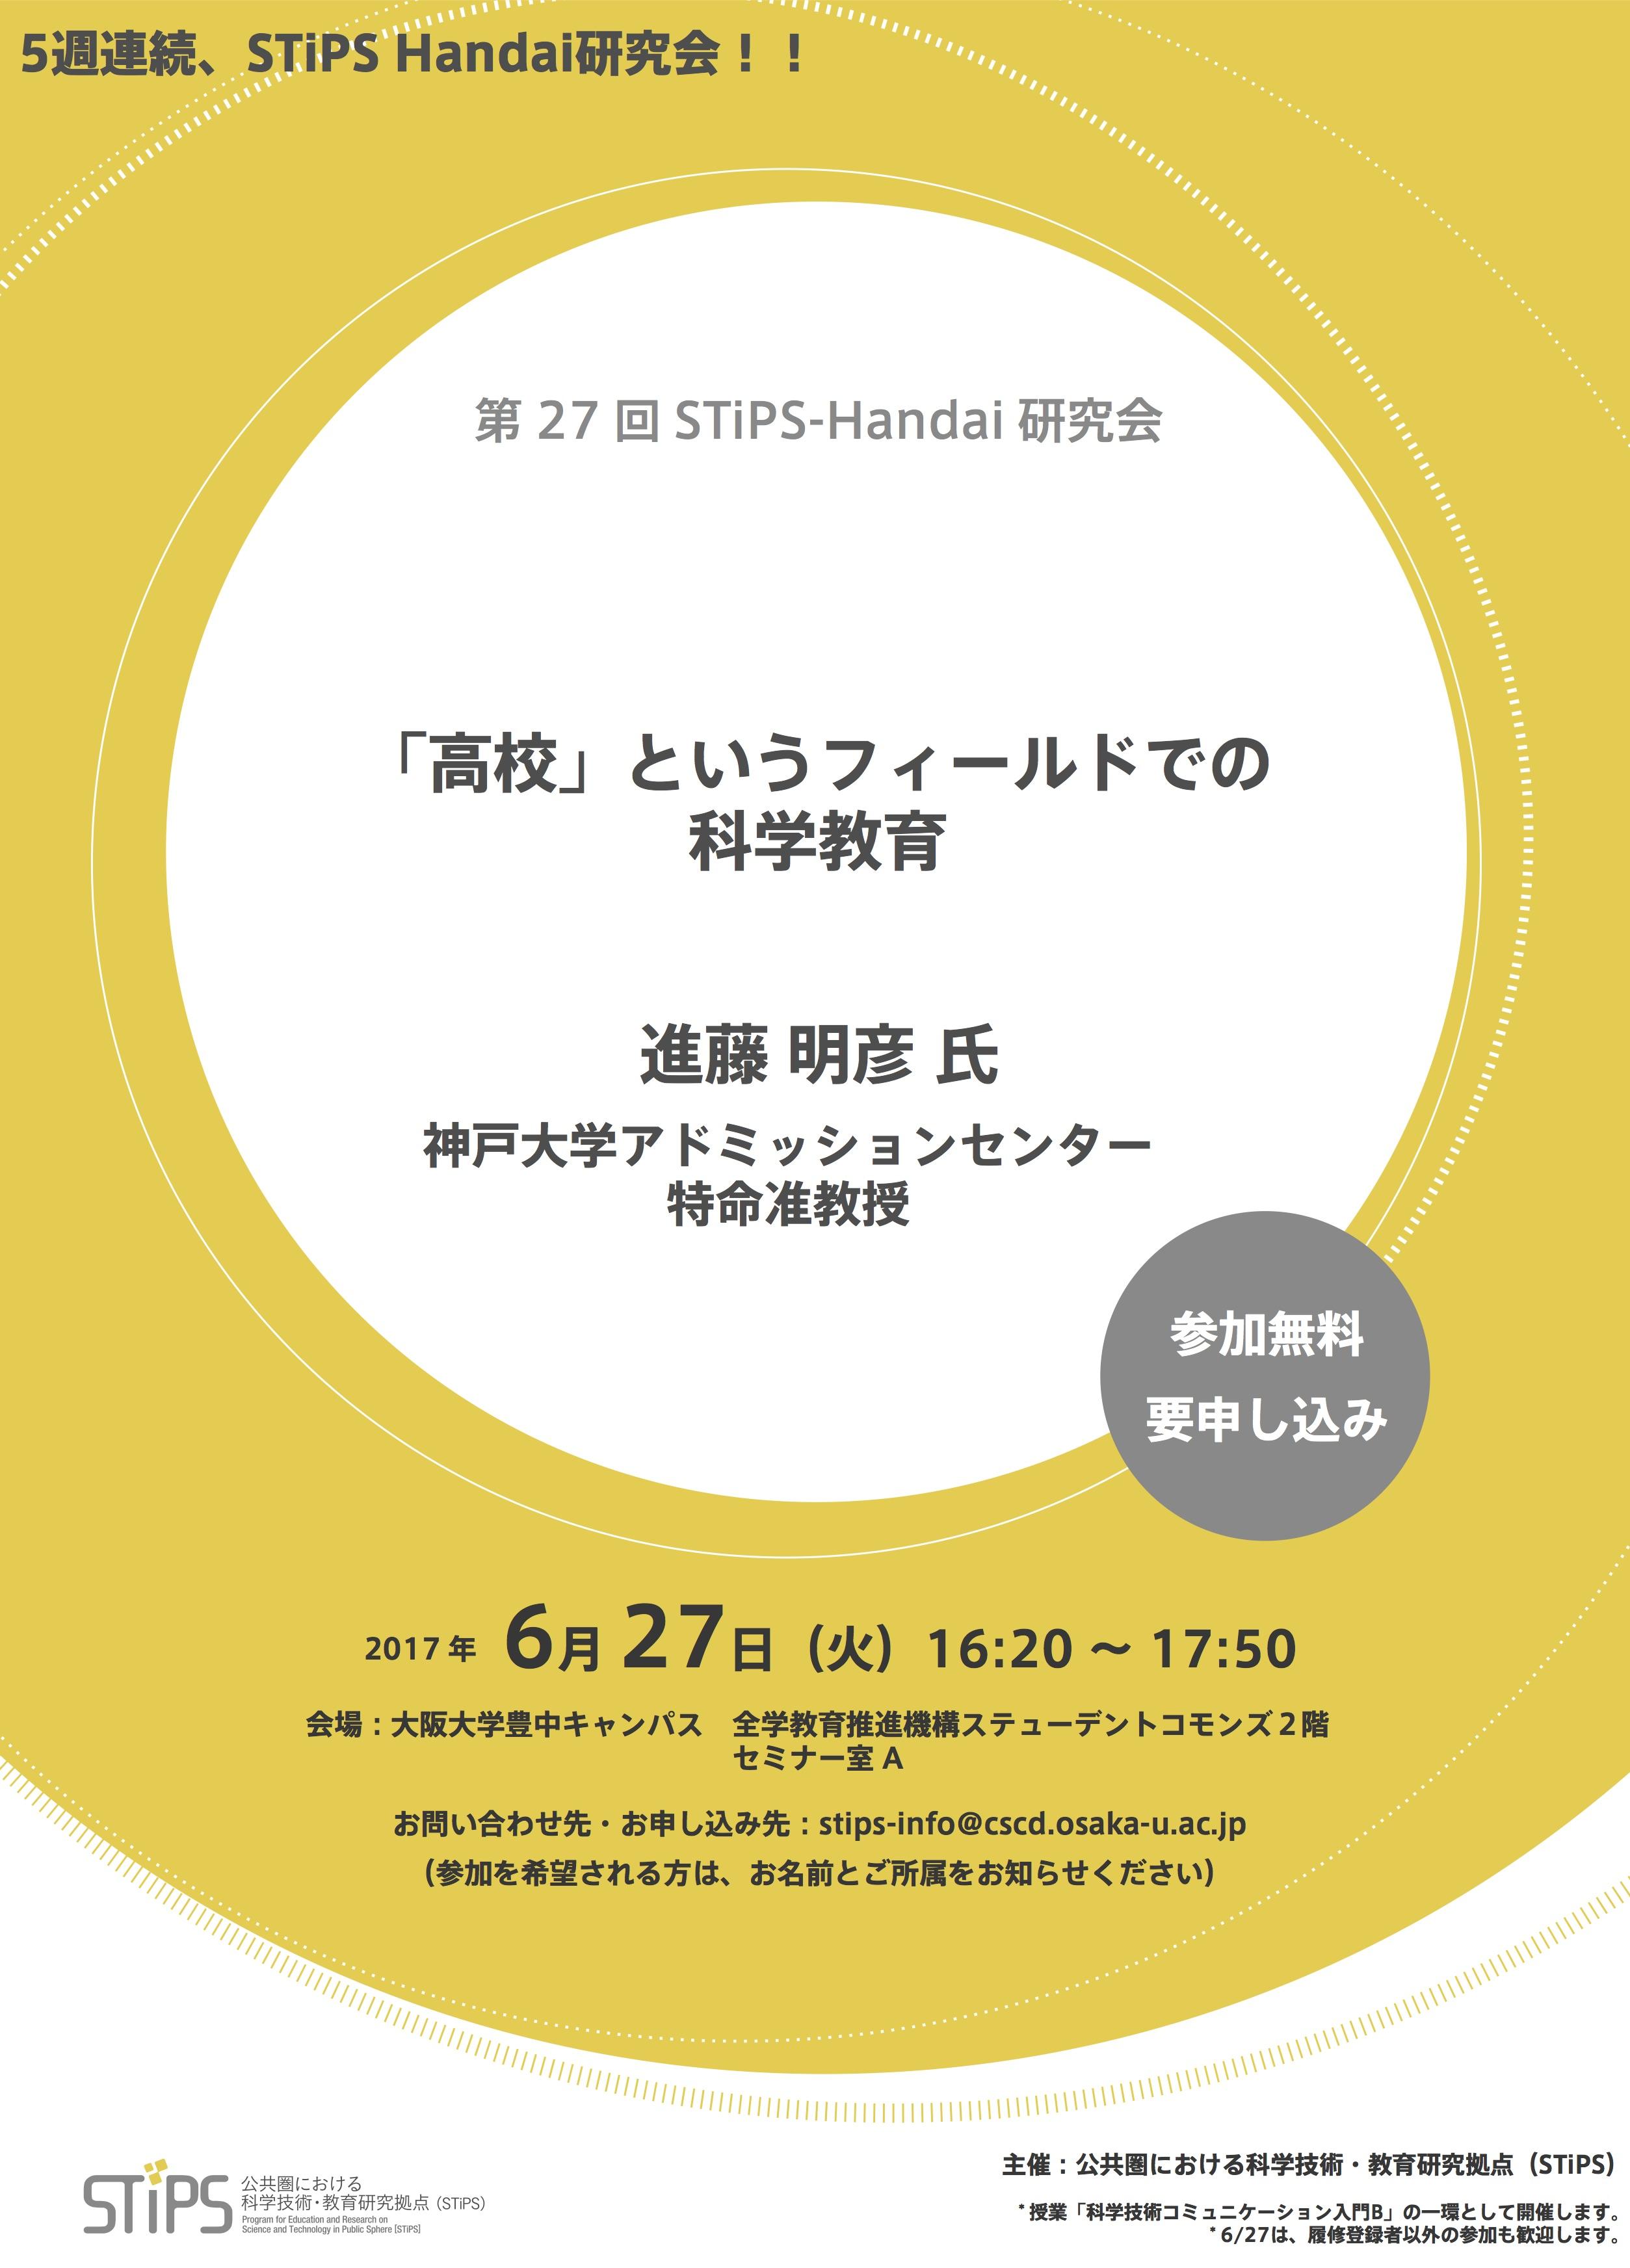 http://scirex.grips.ac.jp/events/STiPS-Handai_for170627.jpg